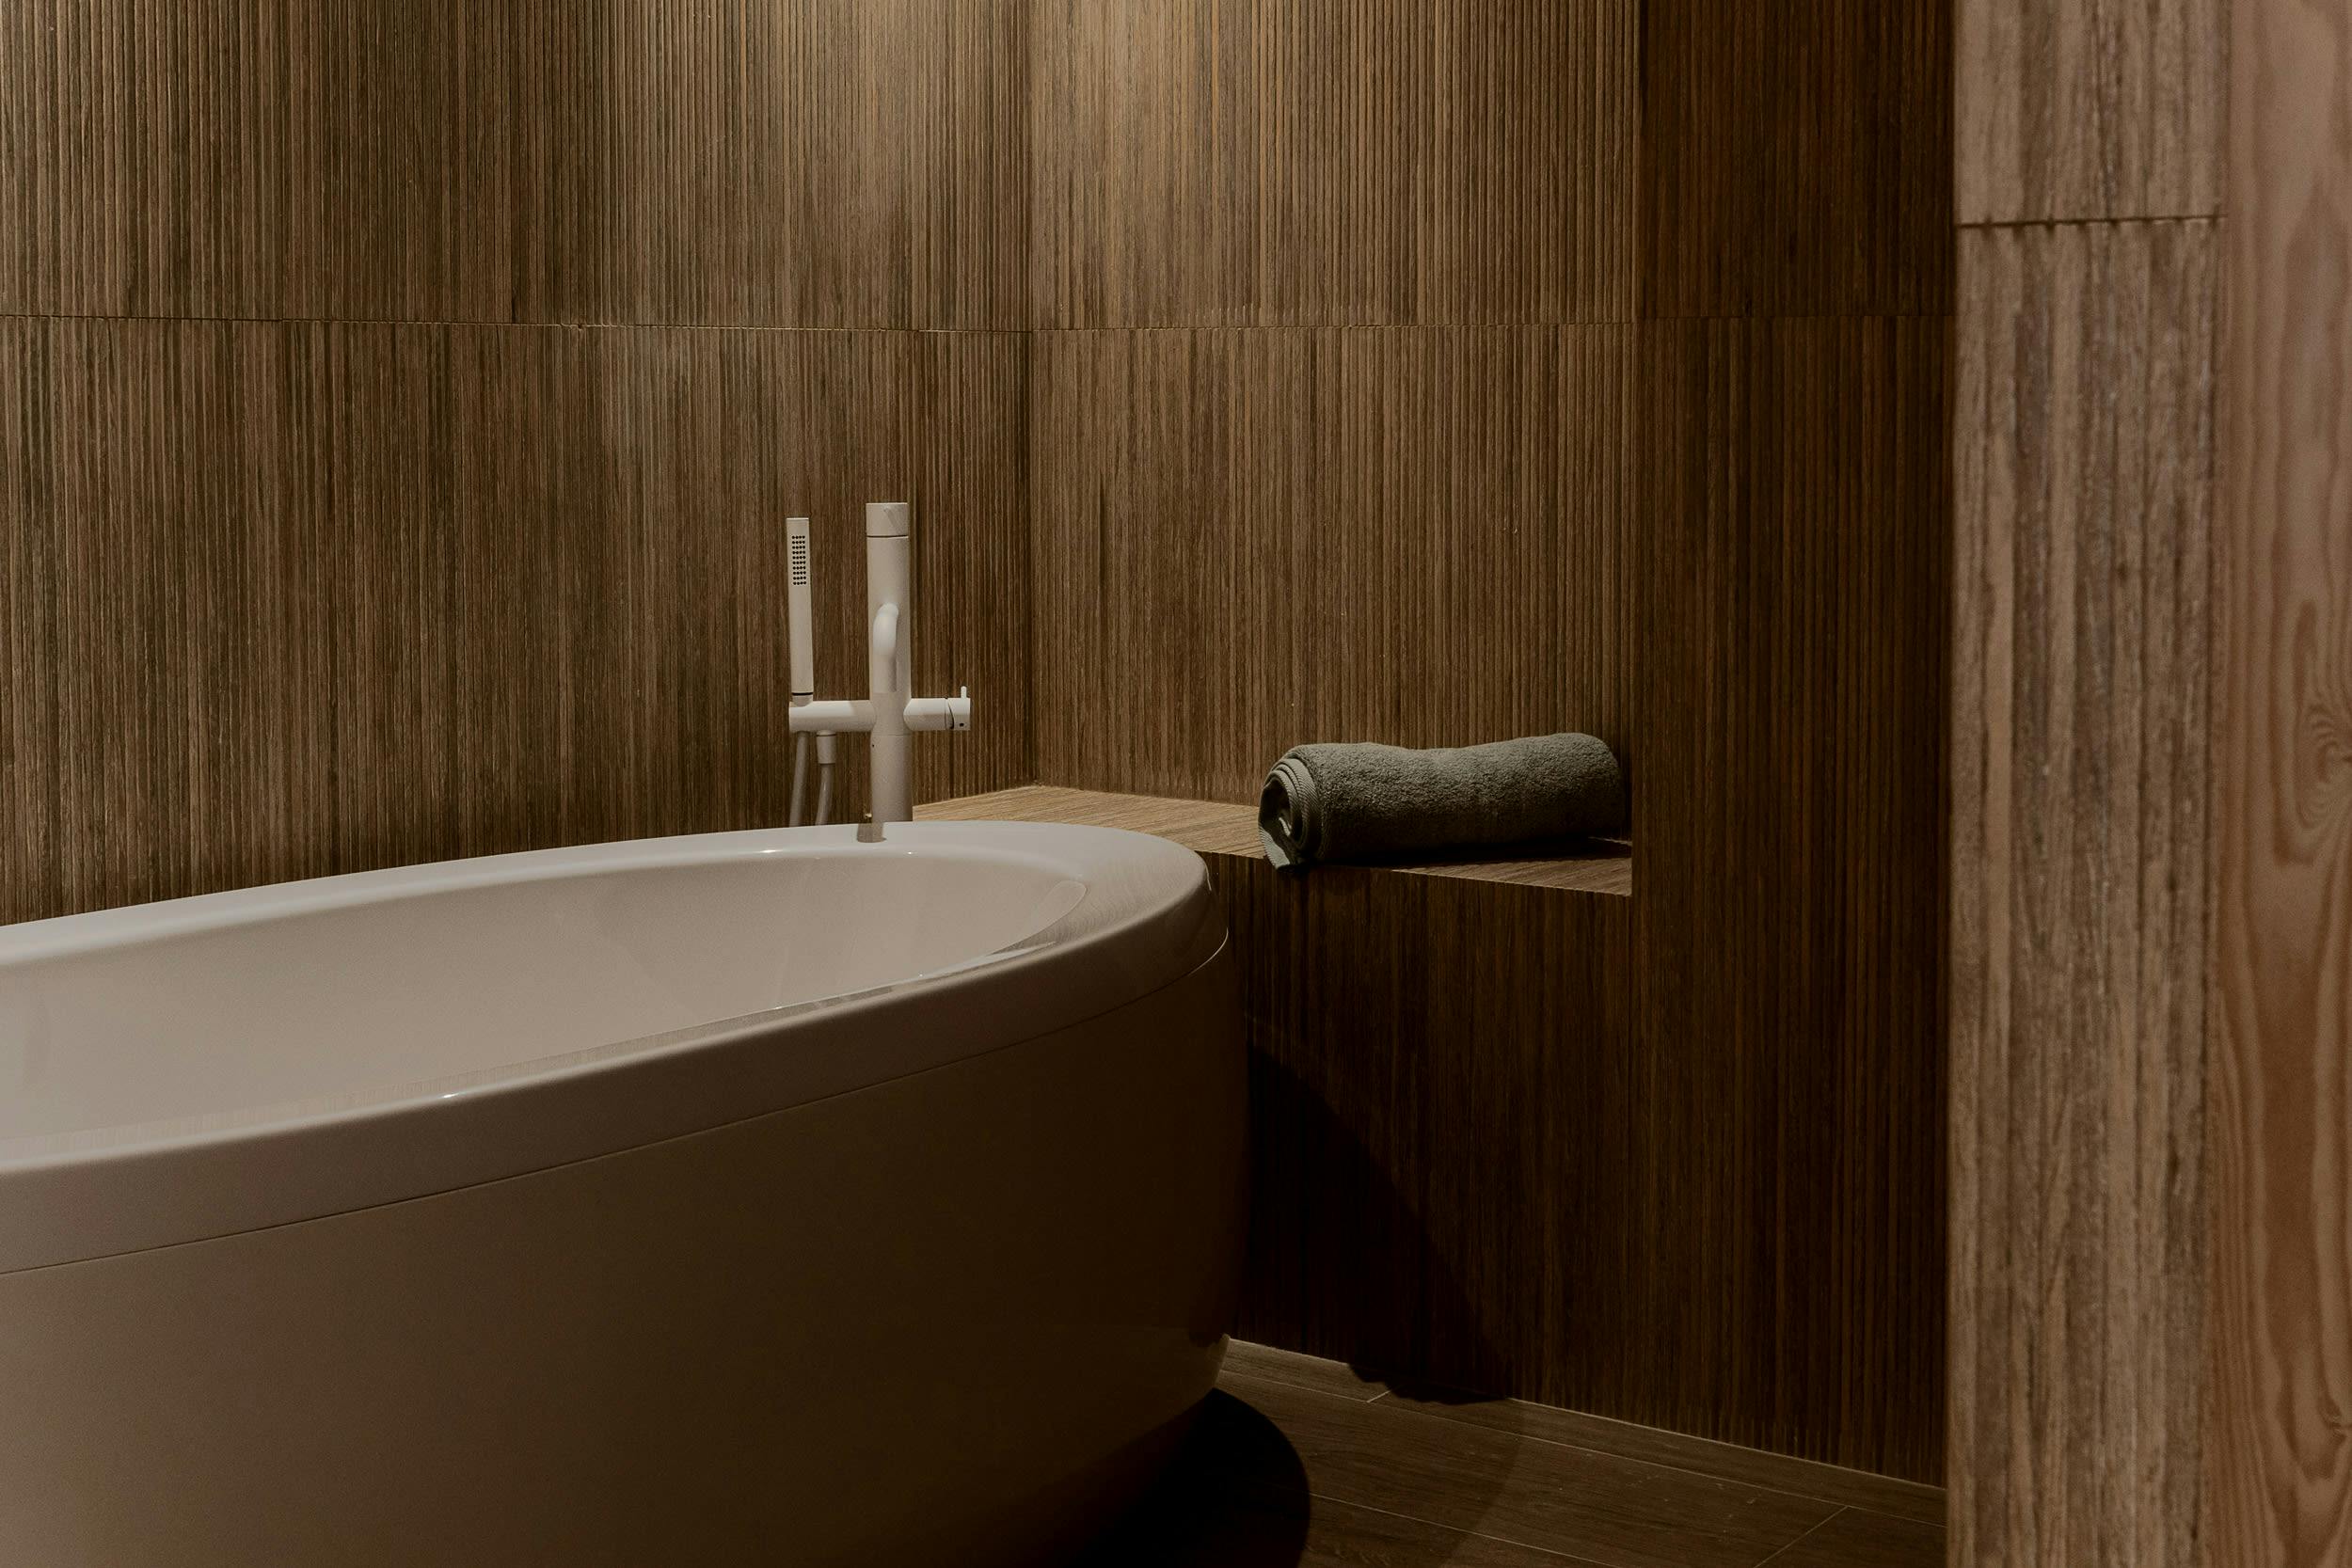 The image features a large, white bathtub in a bathroom with brown walls, a wooden wall, and a wooden floor.